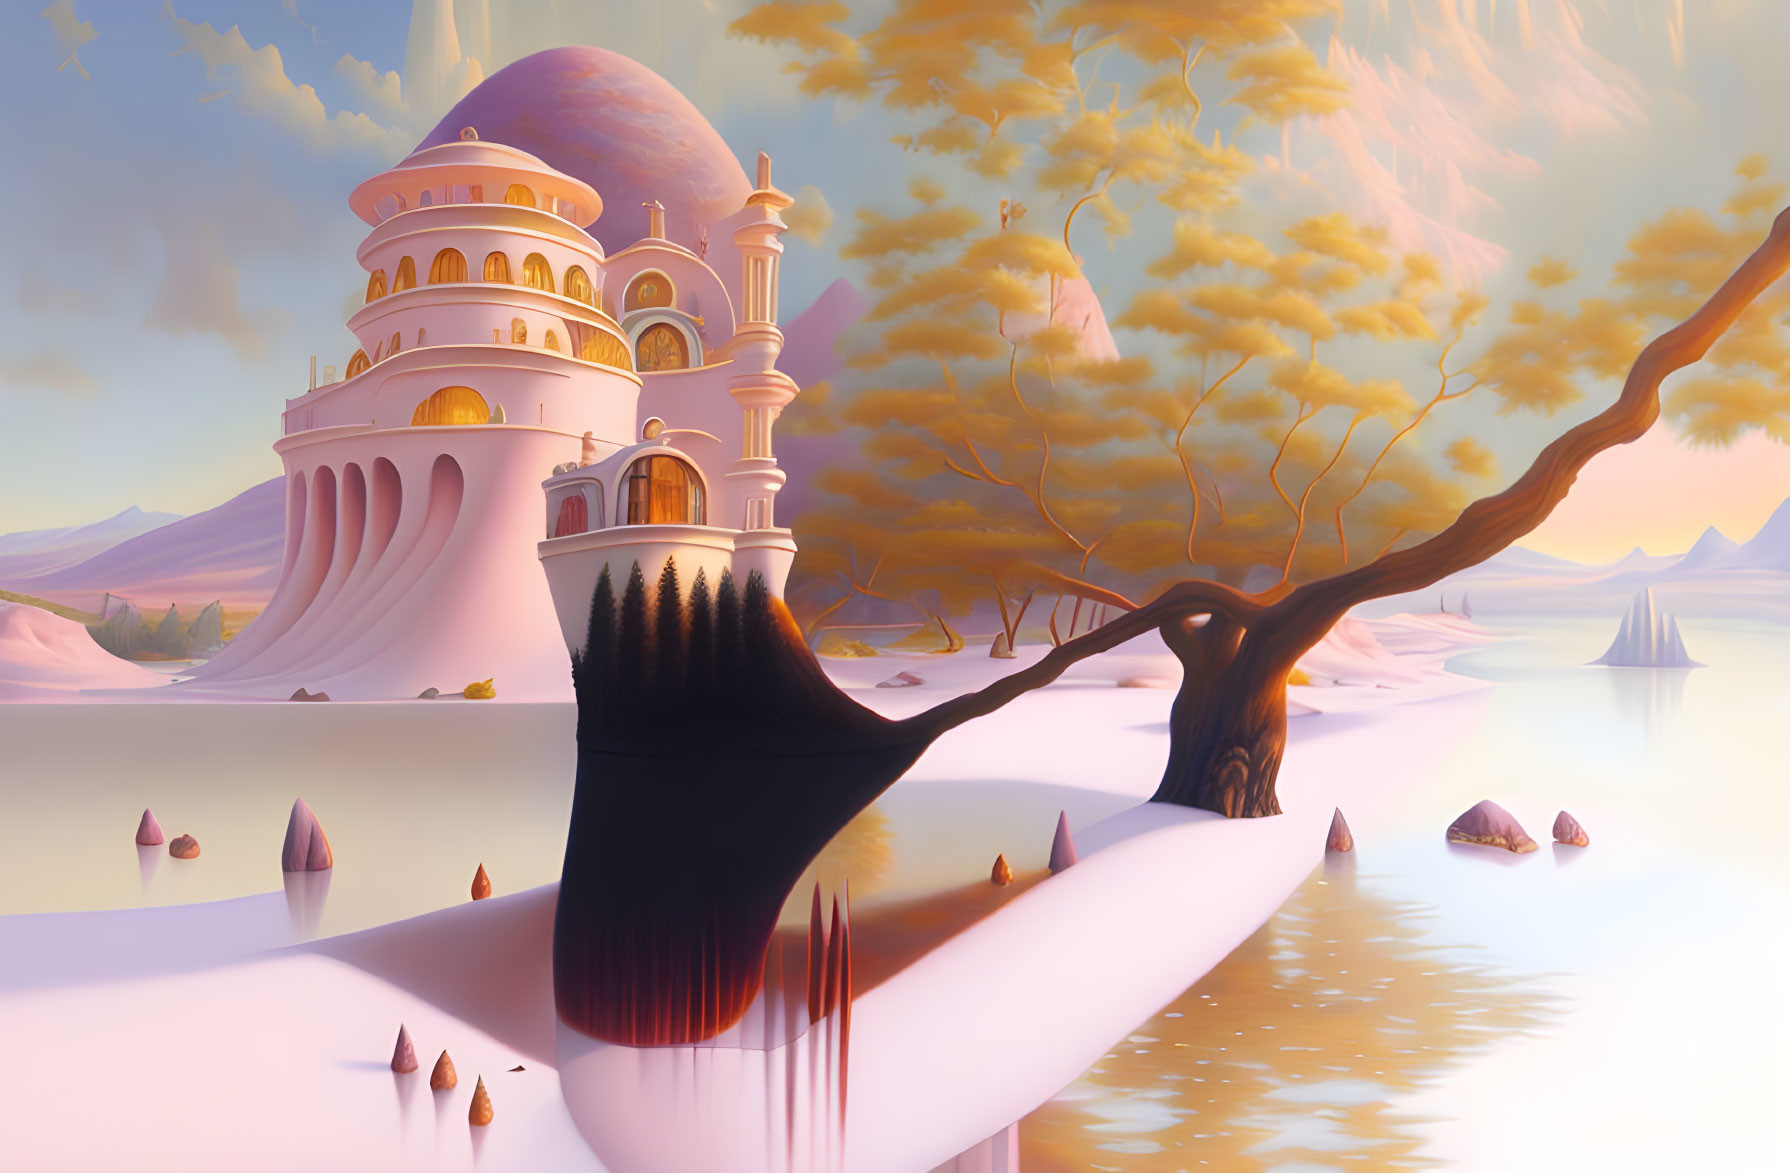 Majestic palace on cliff in whimsical painting with pink and yellow skyscape